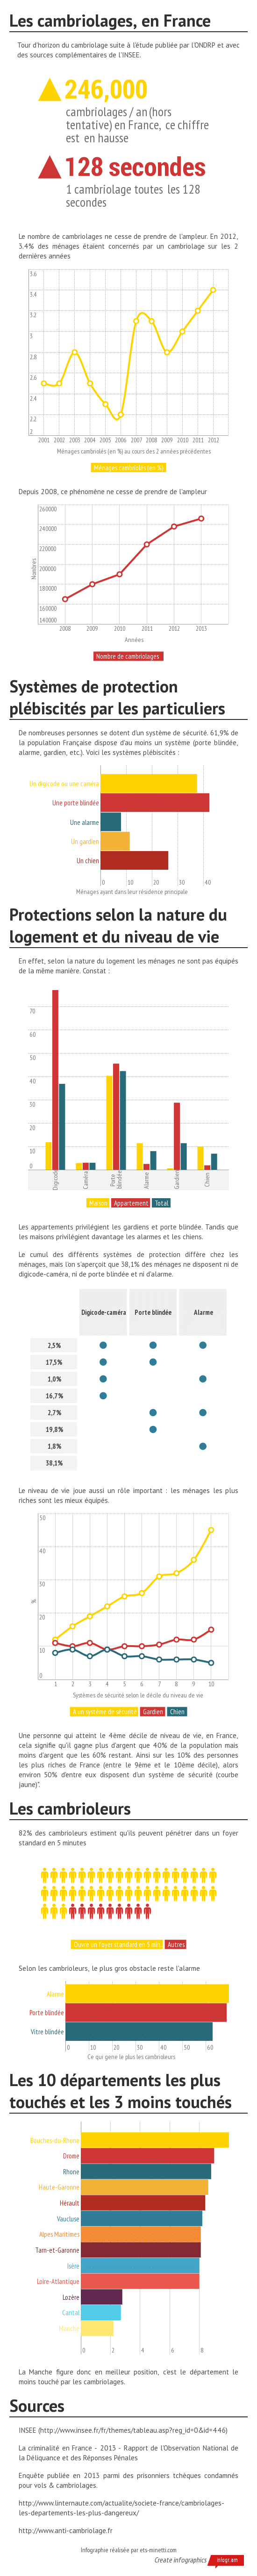 infographie cambriolage